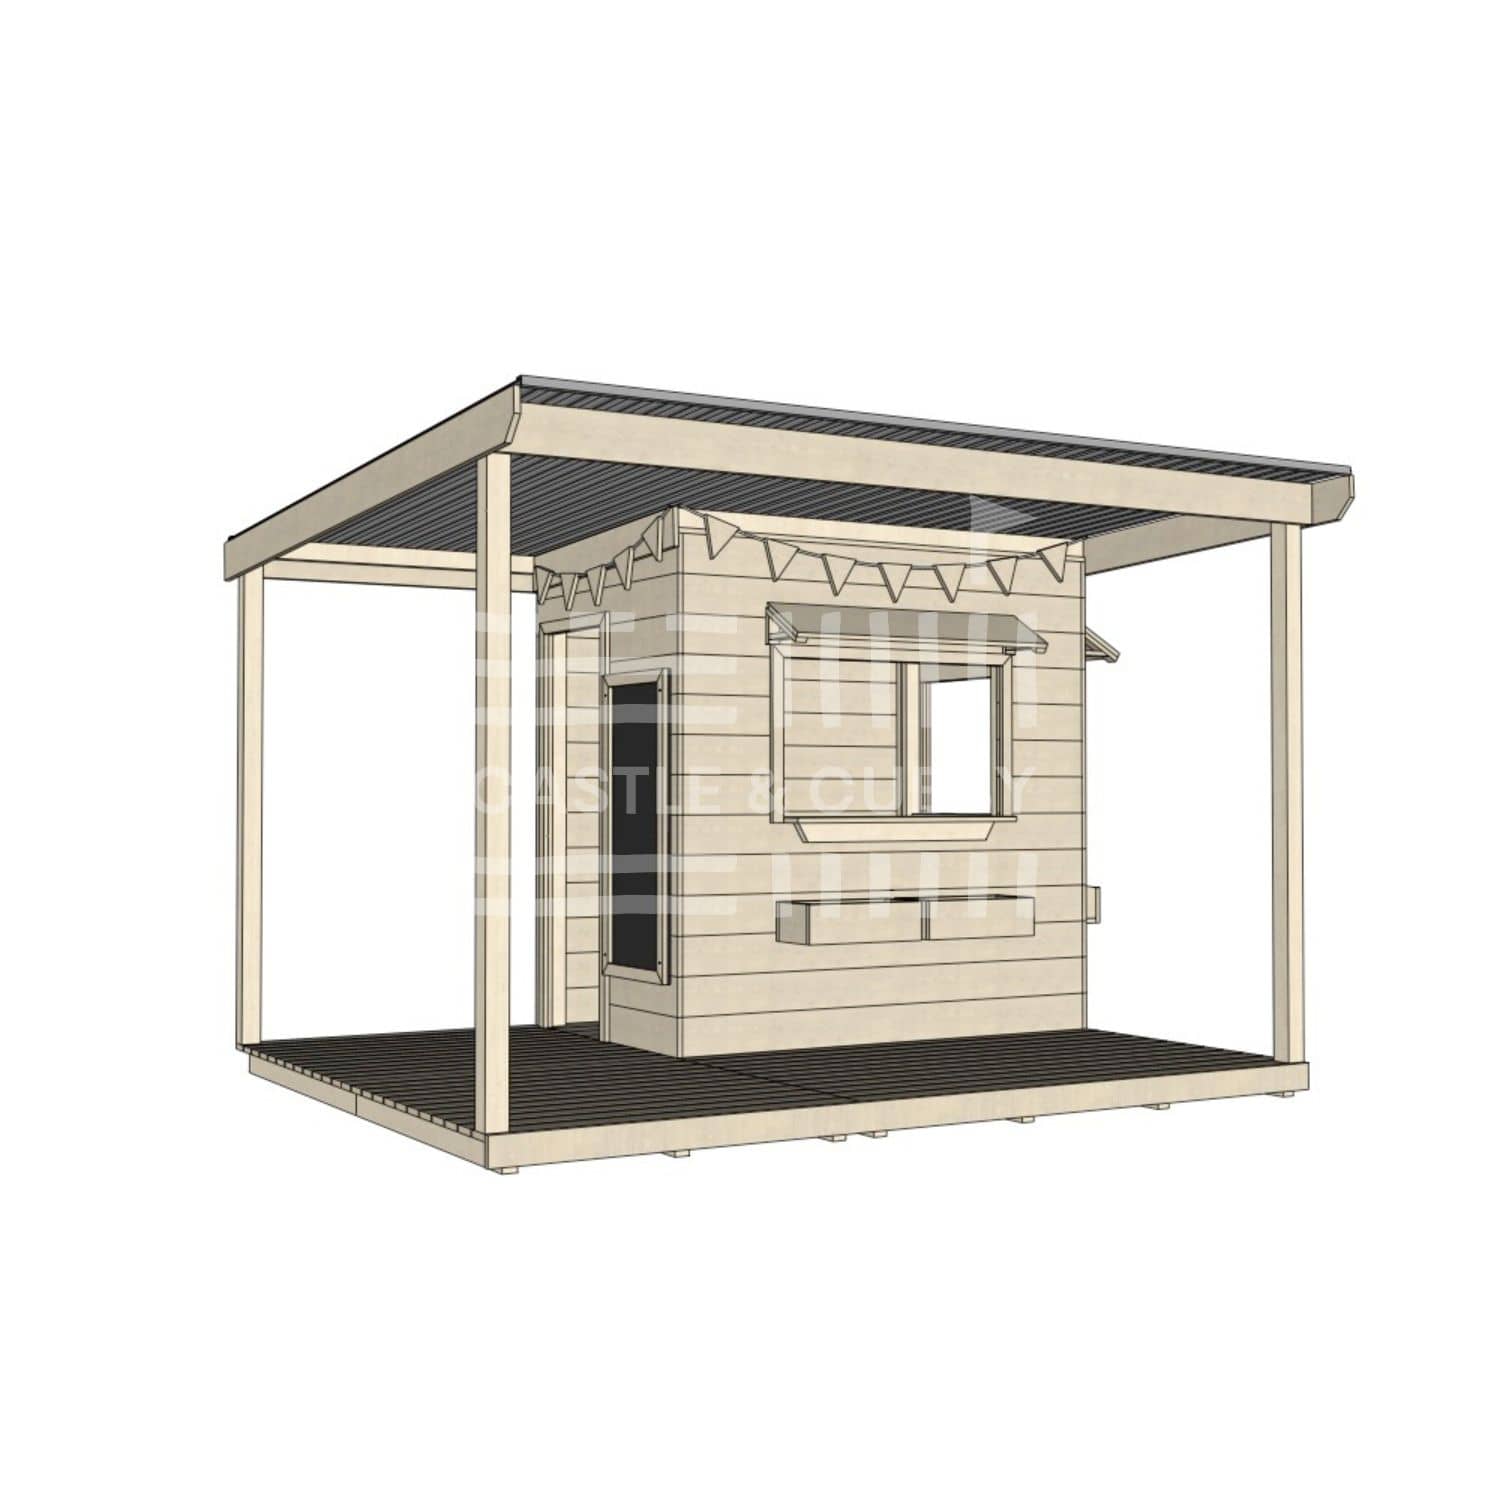 Commercial grade extended height little rectangle wooden cubby house with wraparound verandah and accessories